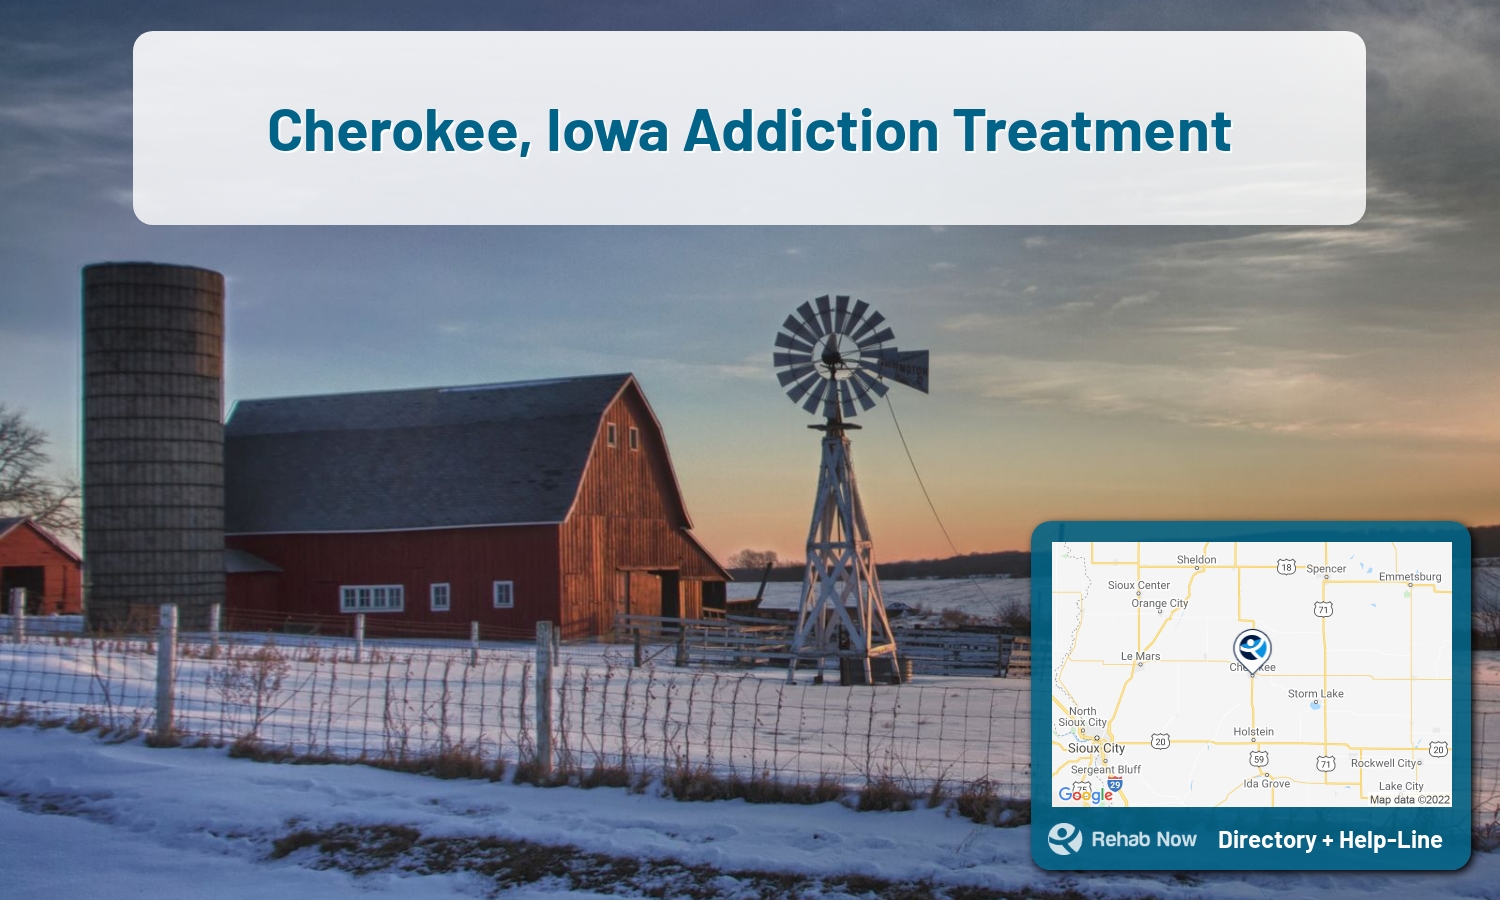 Drug rehab and alcohol treatment services near you in Cherokee, Iowa. Need help choosing a center? Call us, free.